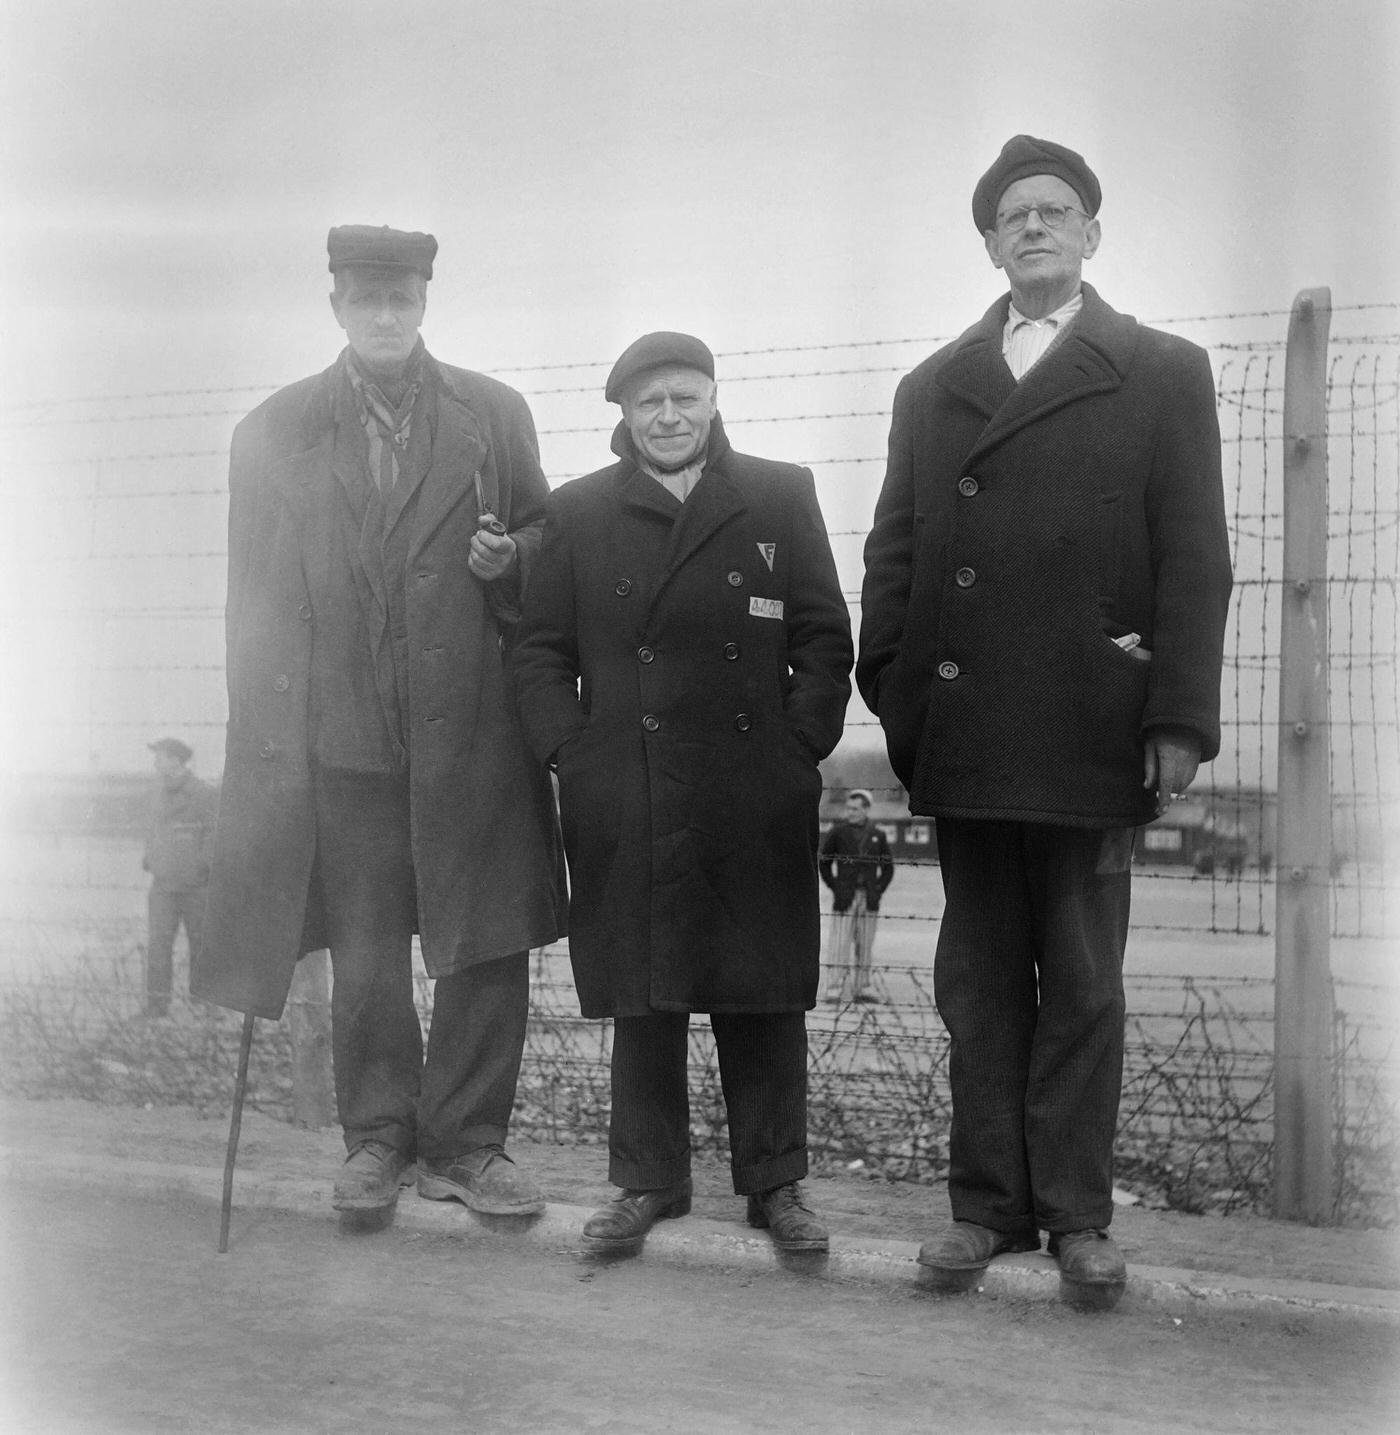 Picture taken in April 1945 at Buchenwald concentration camp featuring former French prisoners Maurice Hewitt, Charles Sander, and Tex.